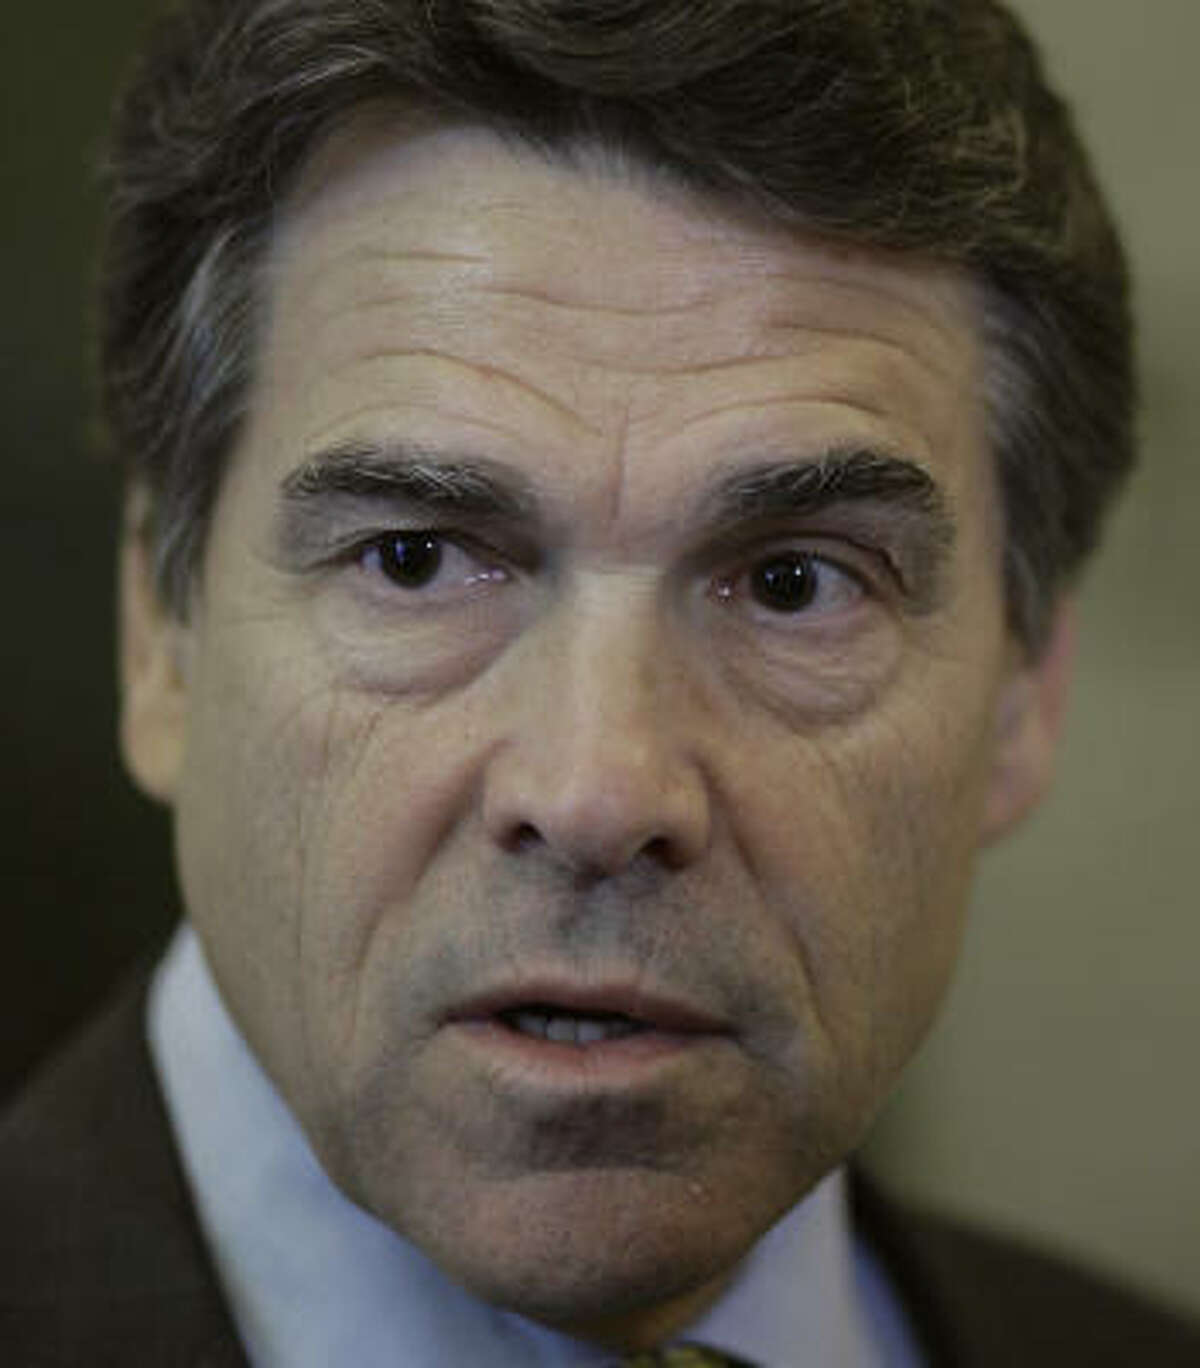 Gov. Rick Perry has threatened a special session if his emergency item on windstorm insurance reform does not pass.